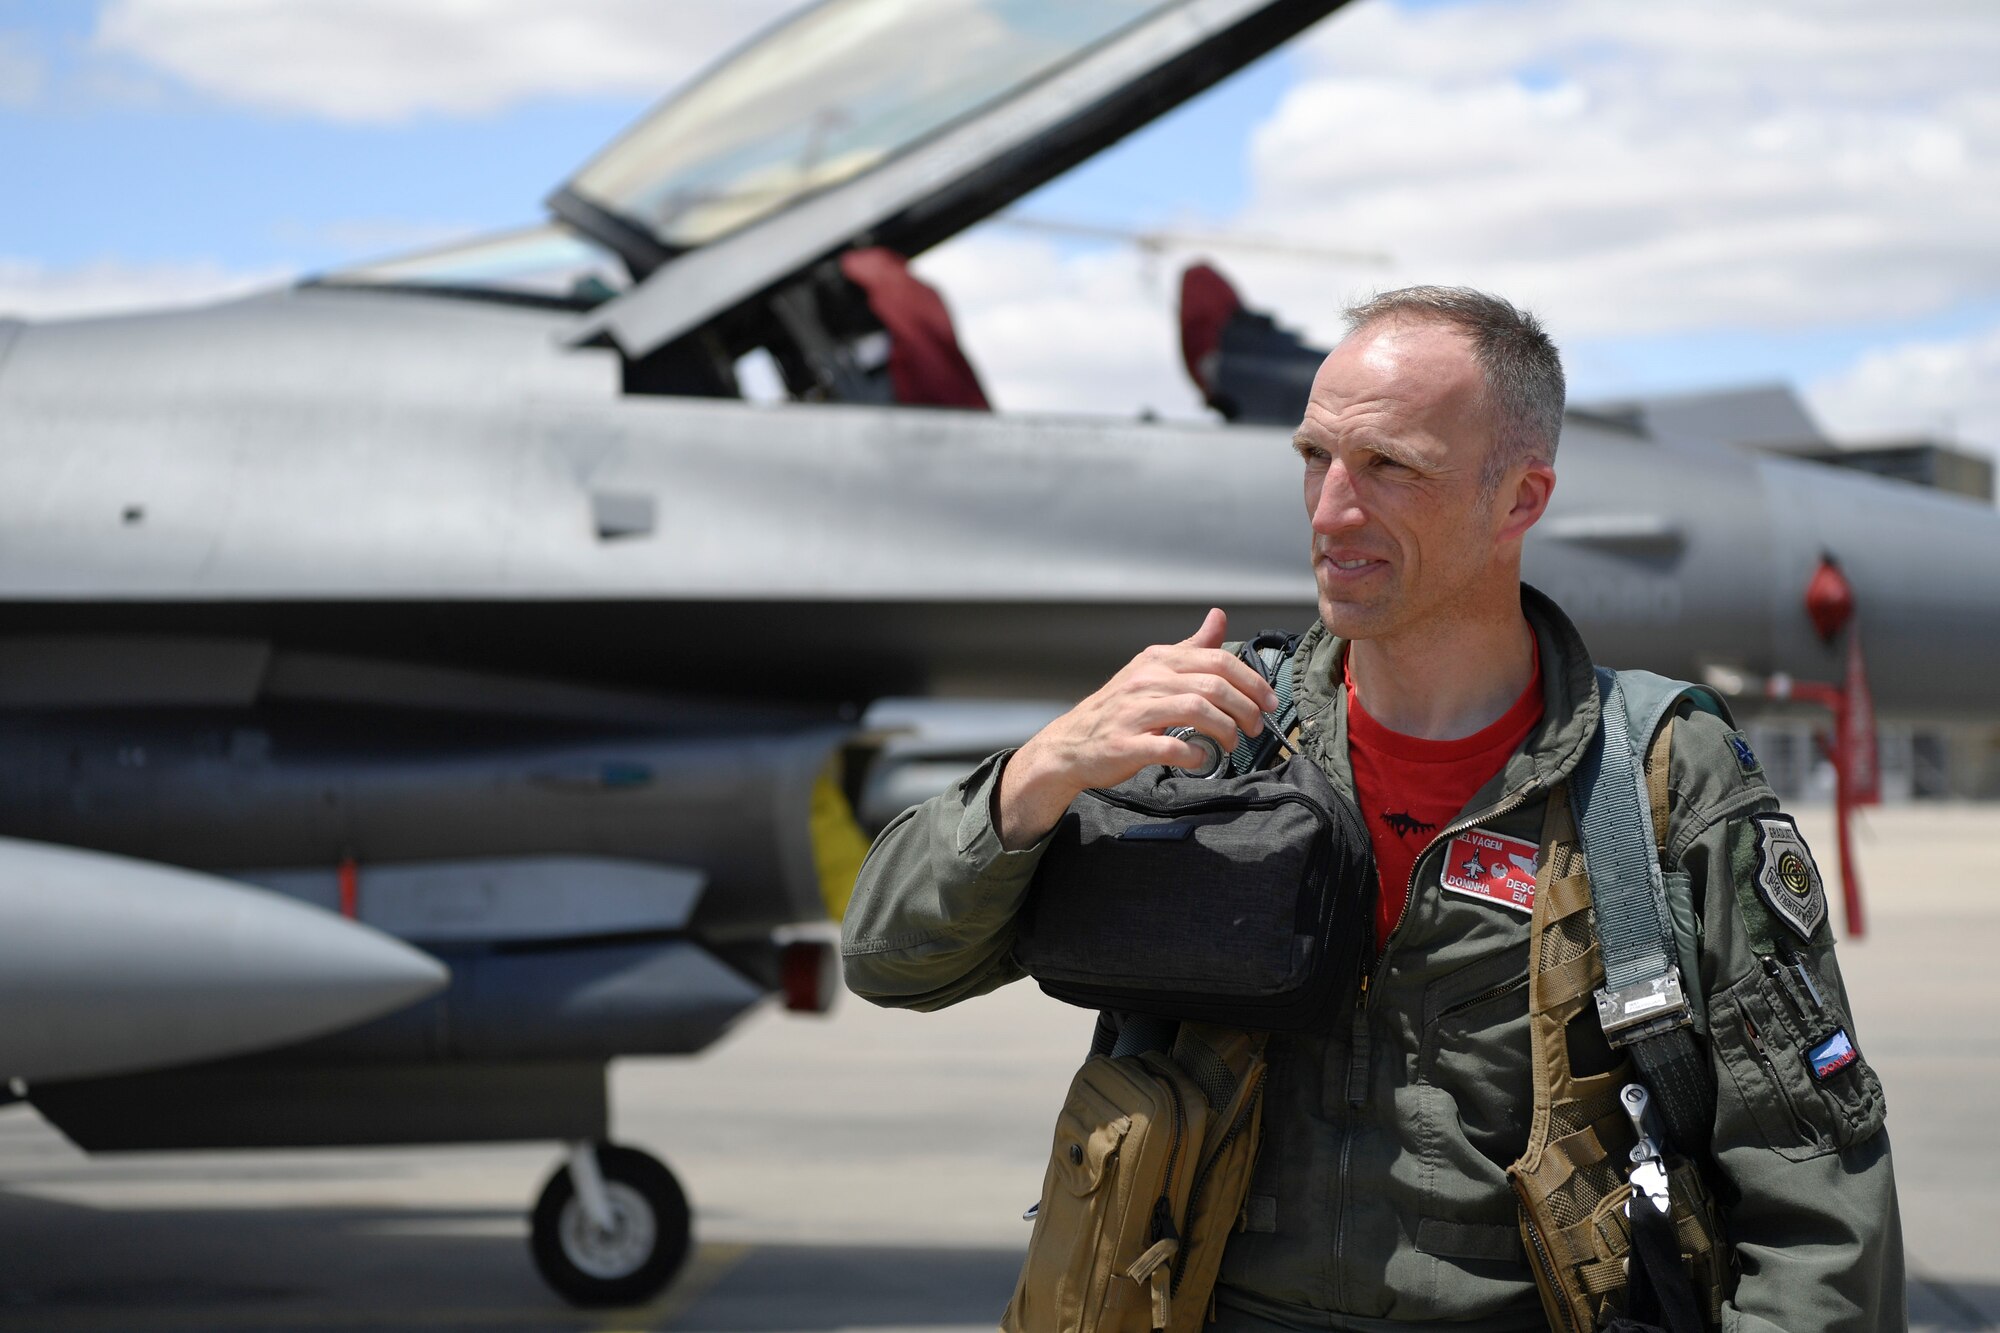 U.S. Air Force Lt. Col. Shaun Loomis, commander of the 480th Fighter Squadron from Spangdahlem Air Base, Germany, arrives in Portugal for Exercise Real Thaw 22 at Beja Air Base, Portugal, June 24, 2022. Real Thaw is an annual multi-national training exercise held by the Portuguese Air Force. The 480th Fighter Squadron has sent 18 F-16 Fighting Falcon aircraft and approximately 320 Airmen to this training.  (U.S. Air Force photo by Tech. Sgt. Warren D. Spearman Jr.)